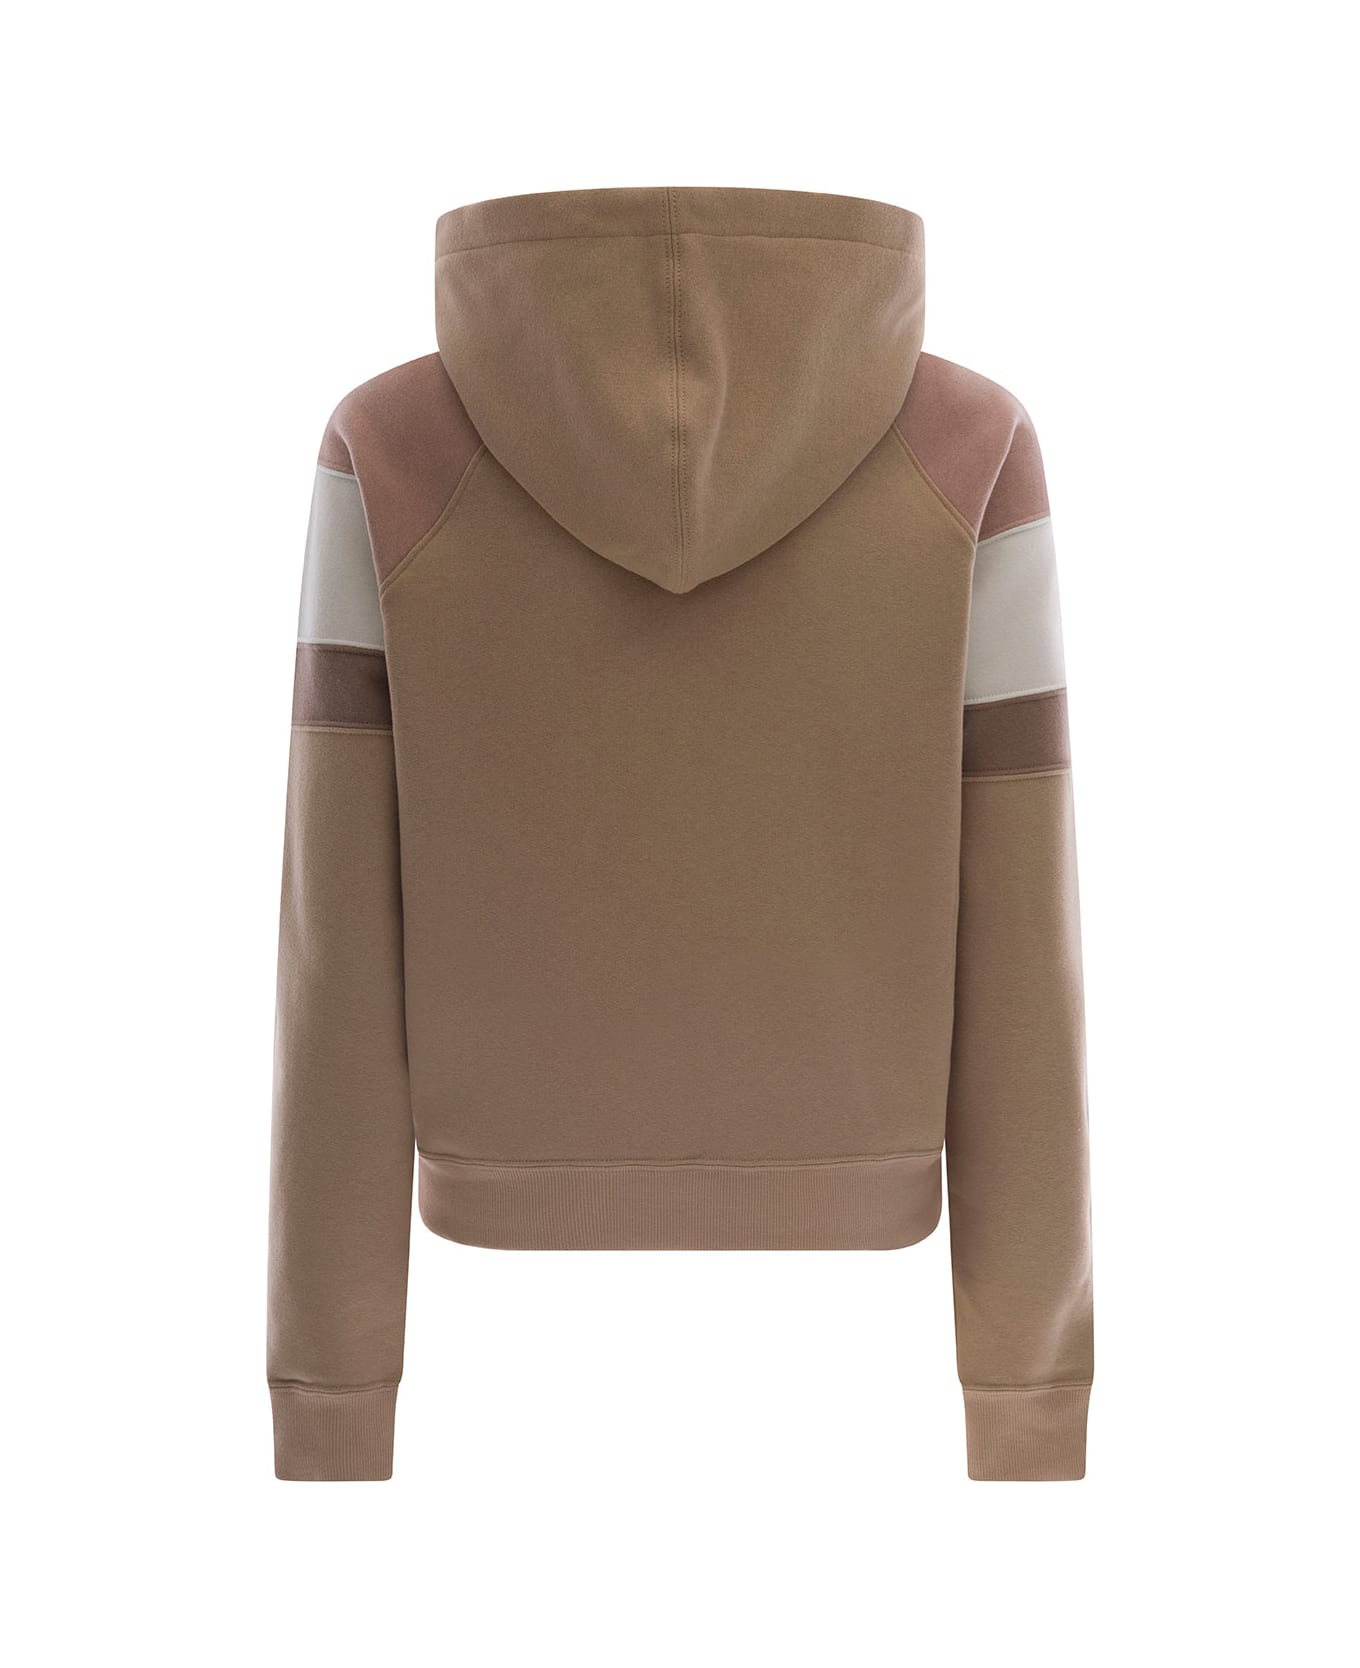 Saint Laurent Sweatshirt With Hood And Embroidered Logo - Nude & Neutrals